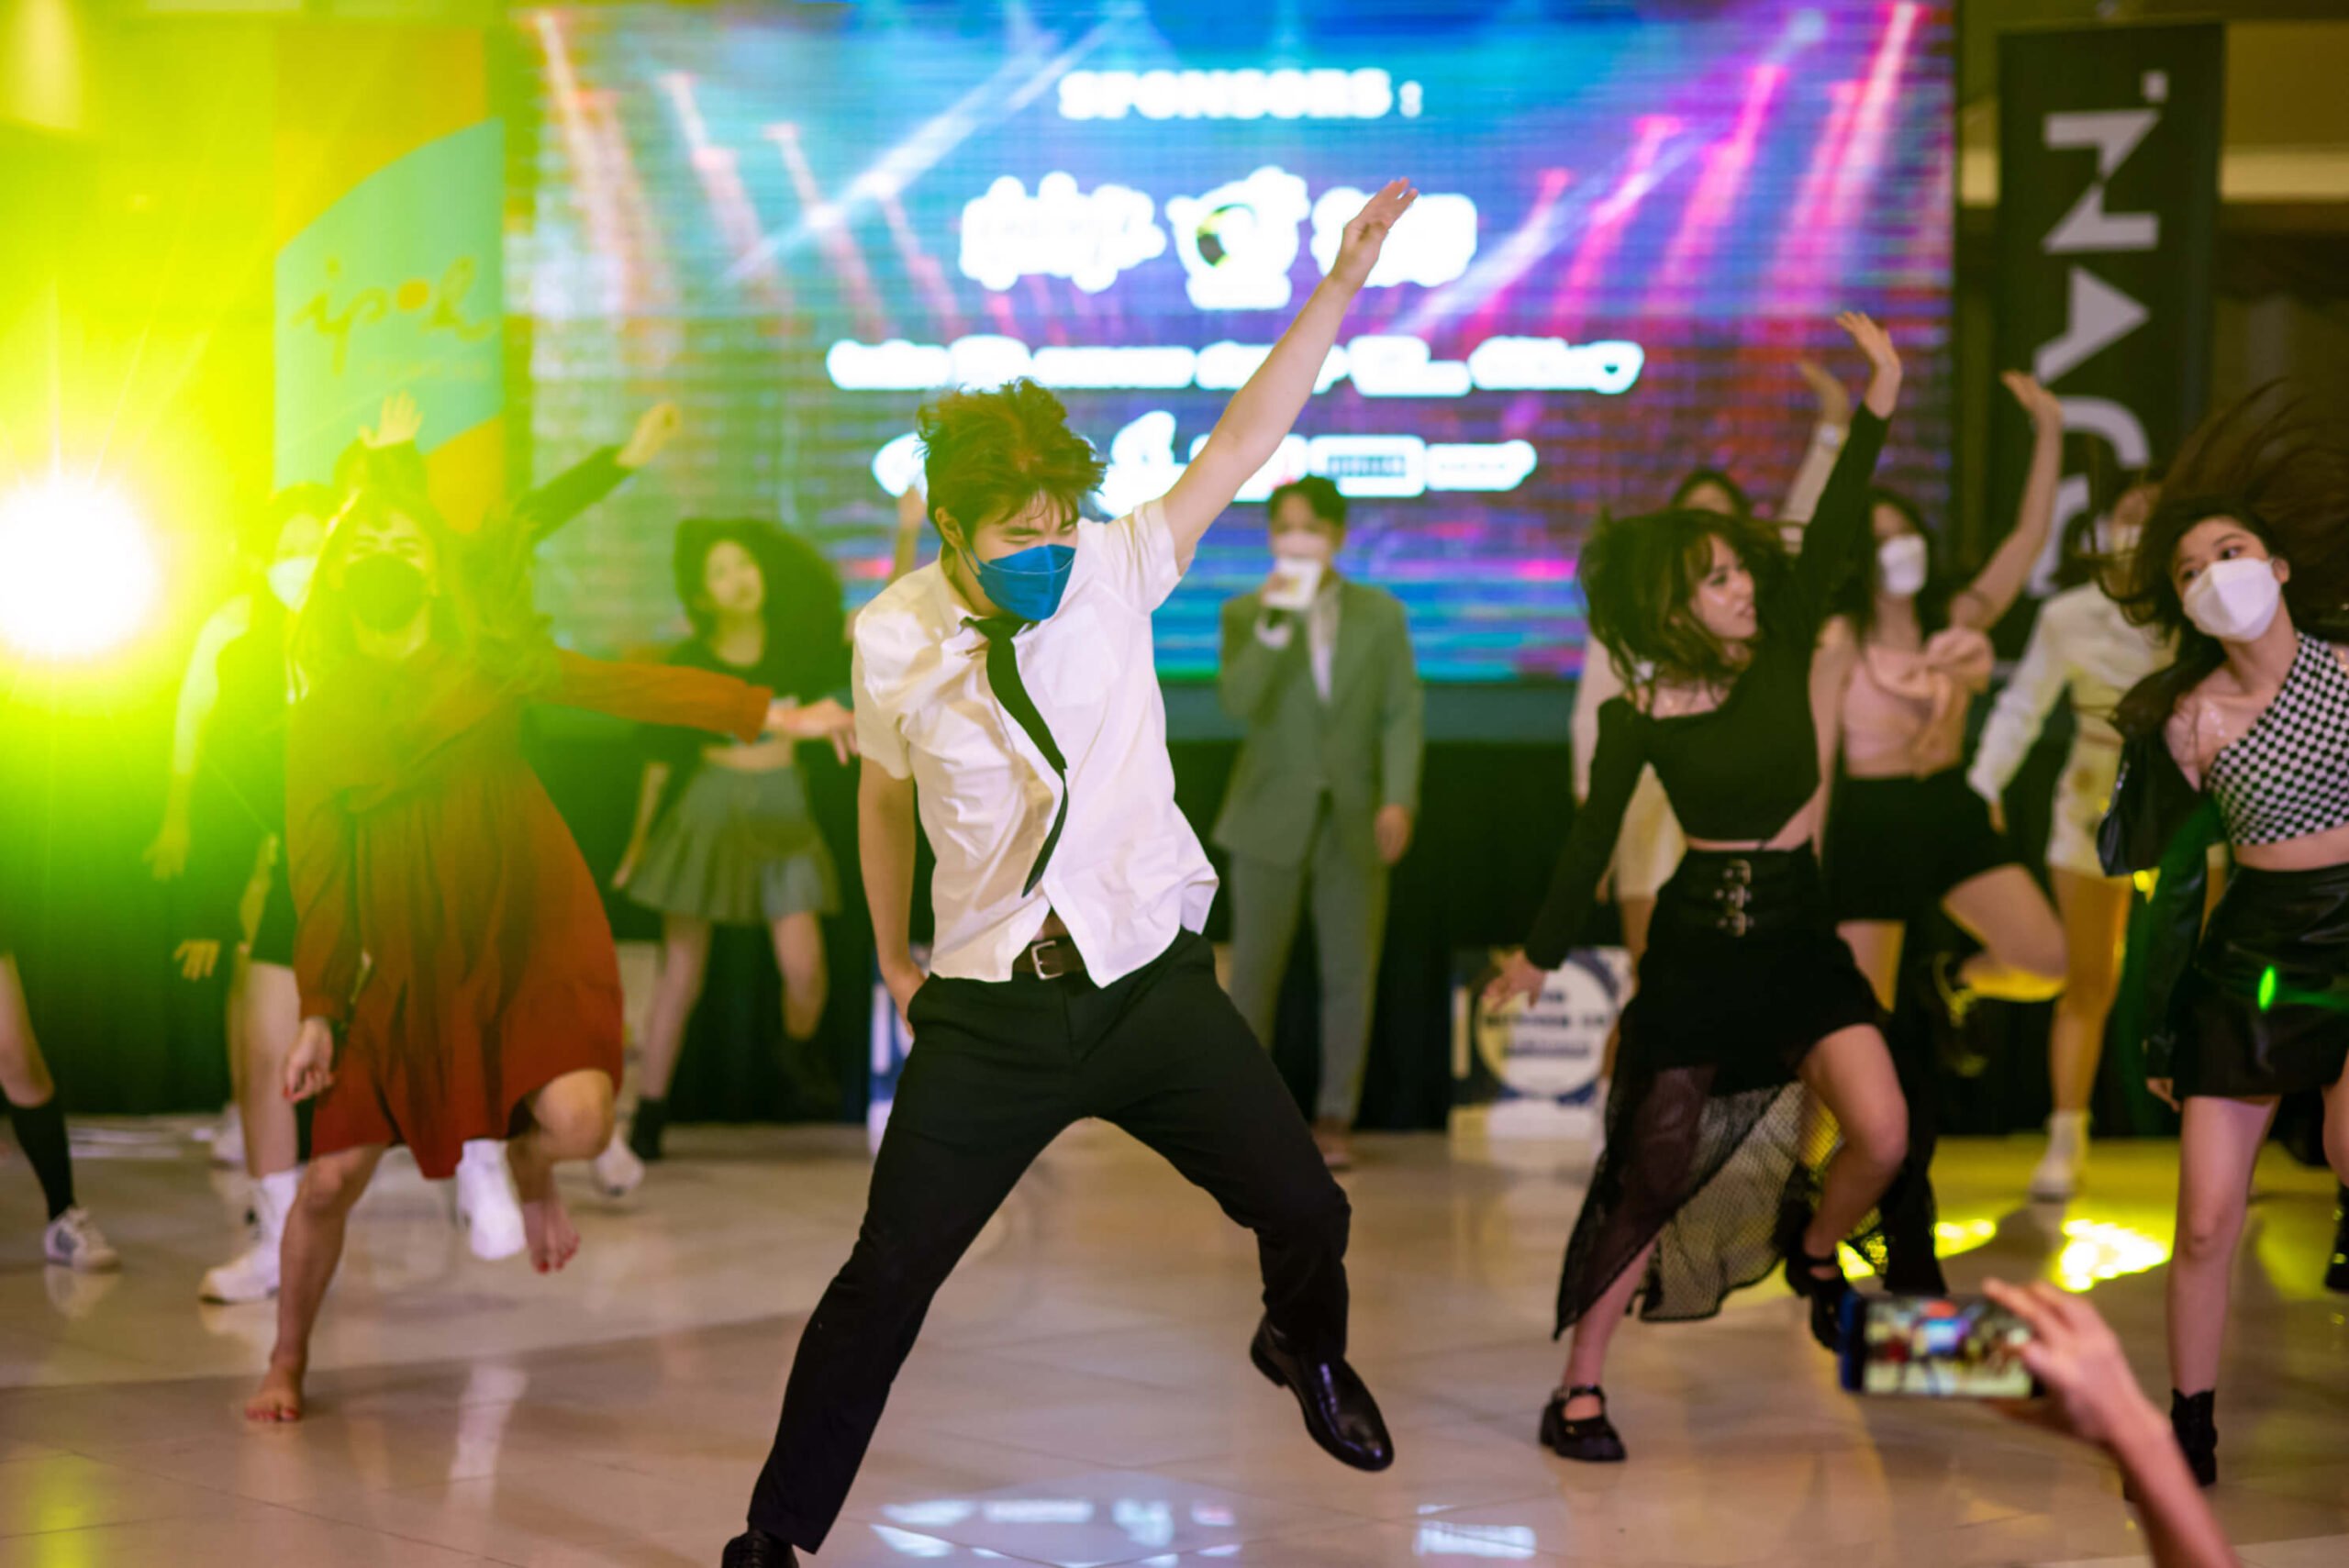 K-Pop Dance Cover participants grooving it out as they await the results